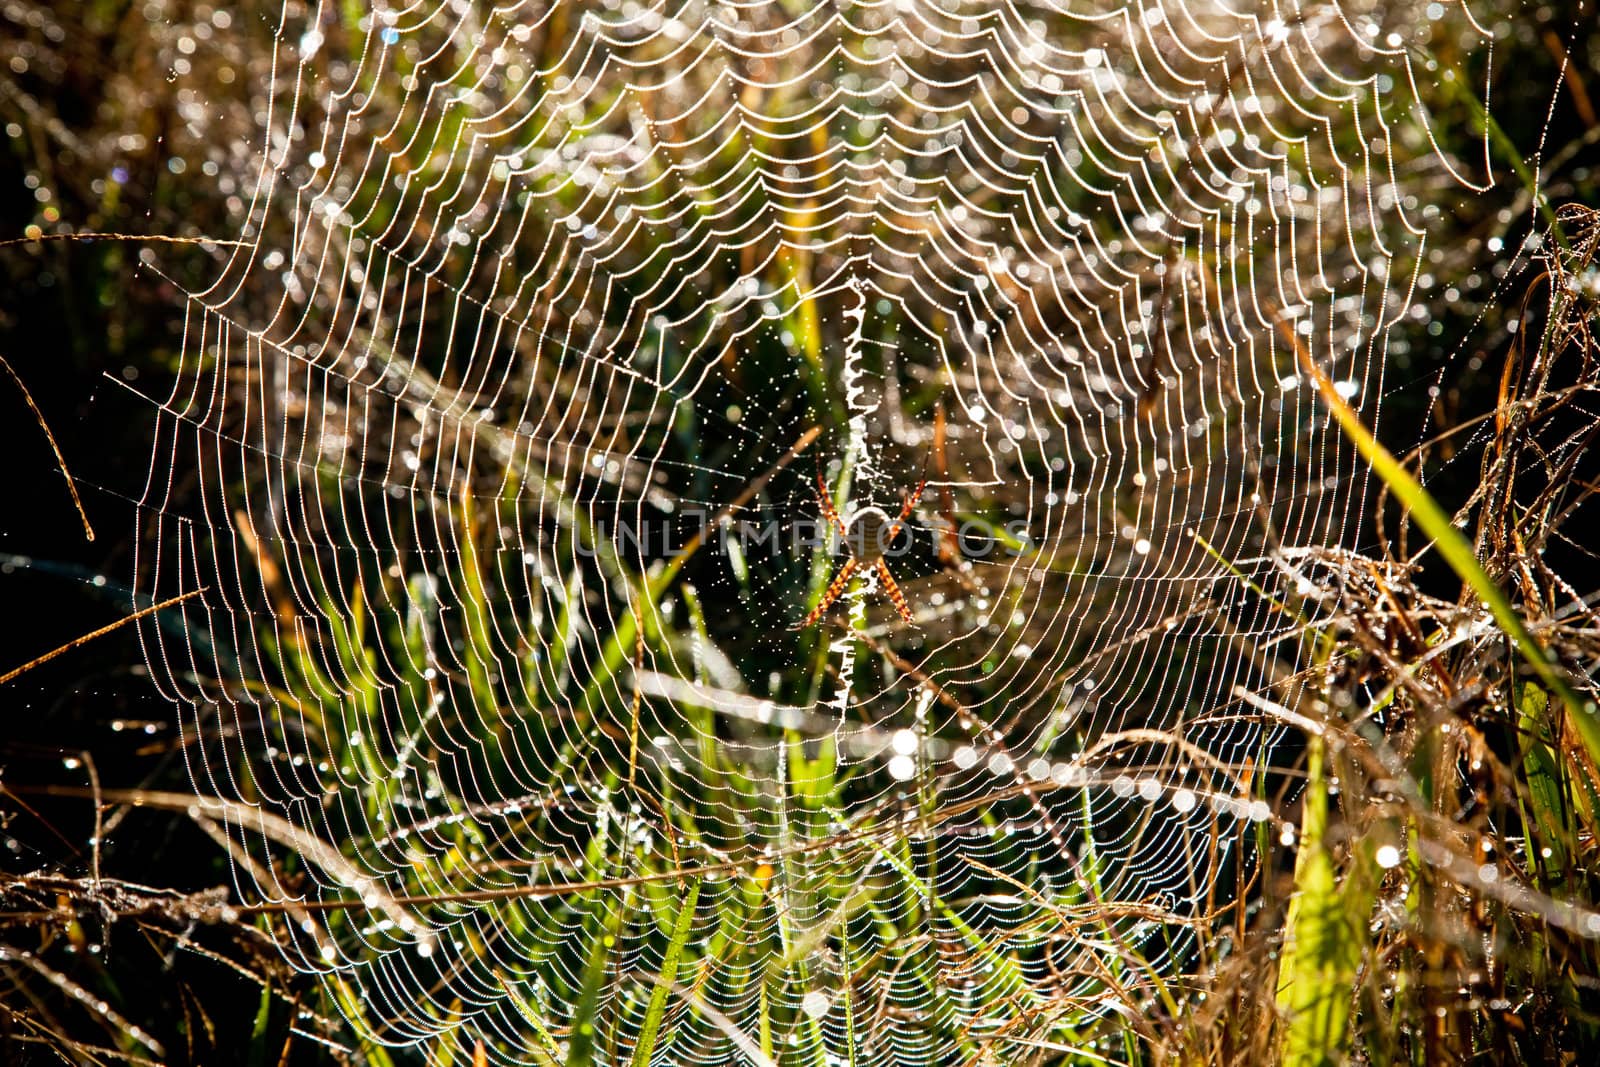 Spider awaiting its prey on a web